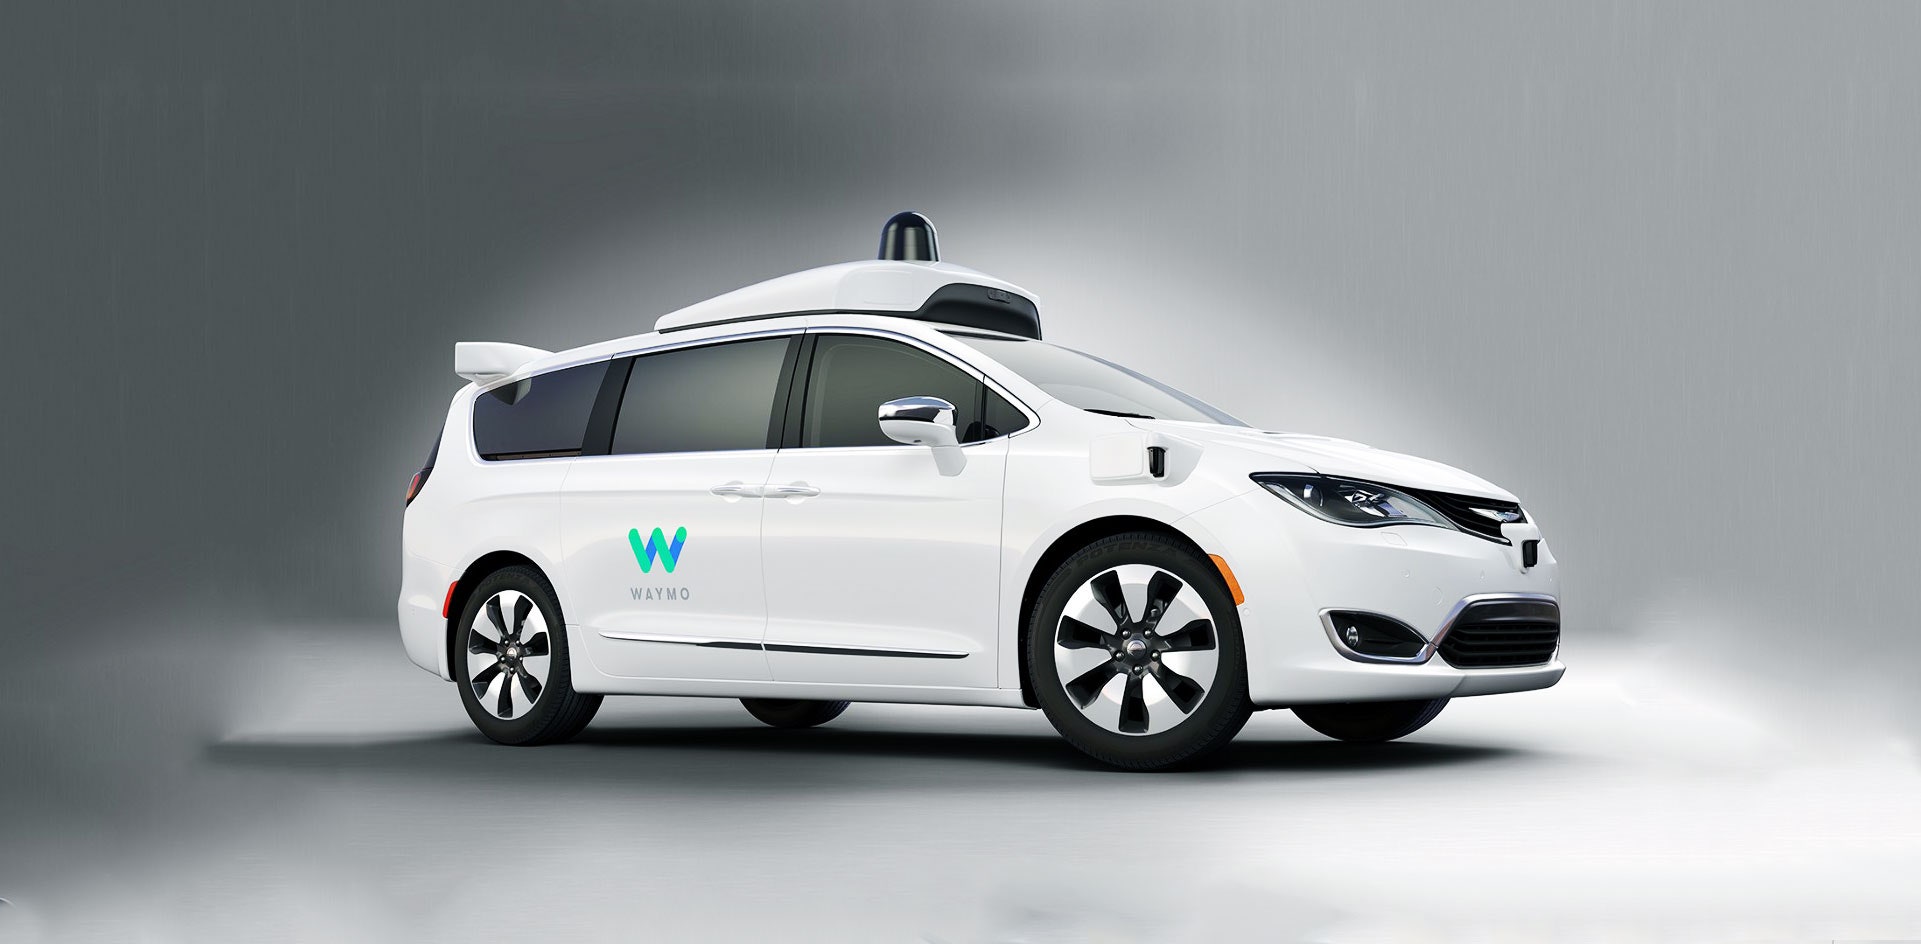 In what ways is Google Waymo a threat to Tesla and its Self Driving Technology?